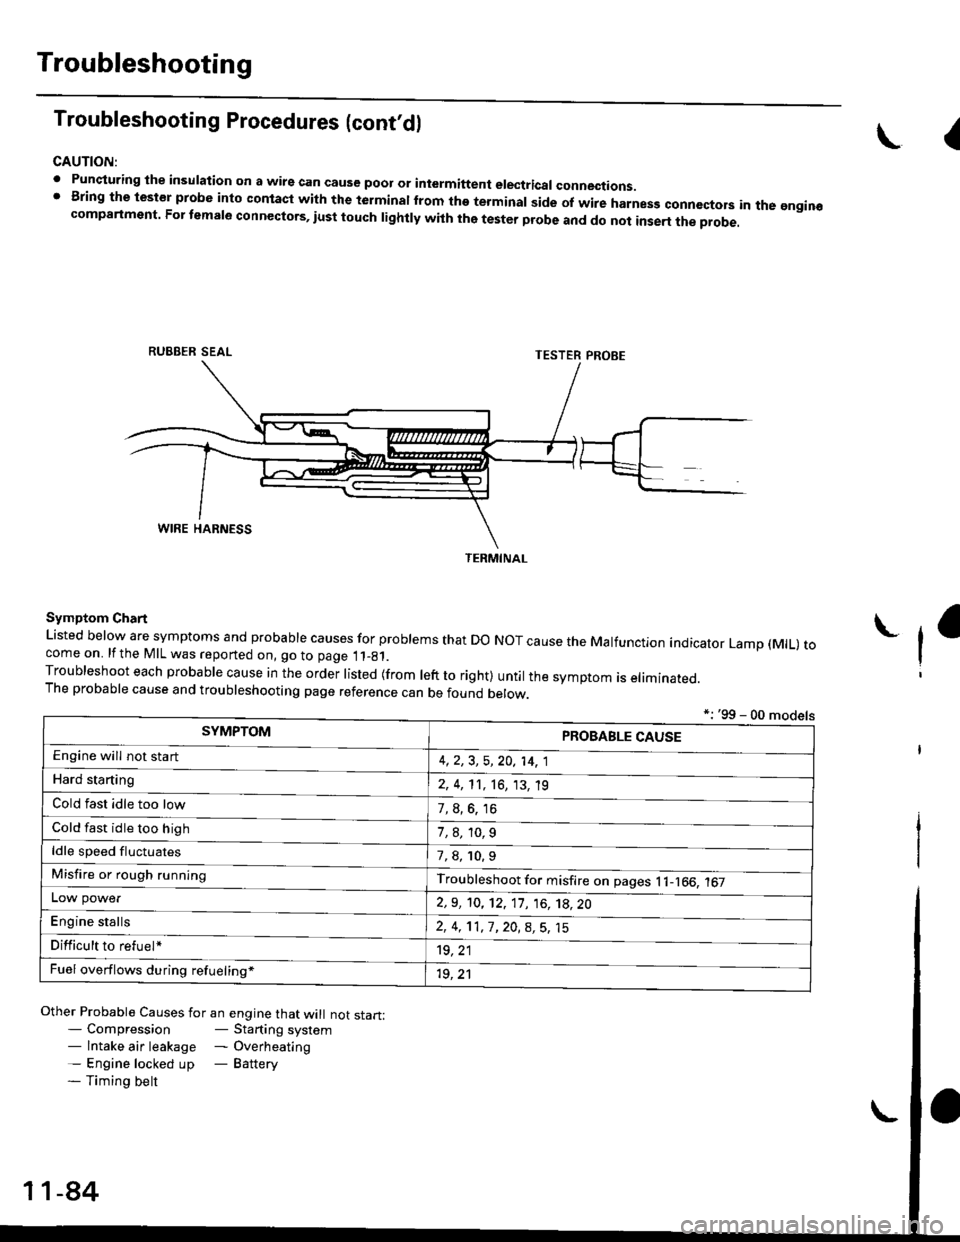 HONDA CIVIC 1996 6.G Workshop Manual Troubleshooting
Troubleshooting Procedures (cont,dl
CAUTION:
. Punqturing ihe insulation on a wirs can cause poor or intermiftent electricar connections.I Bring the test€r probe into contacl with th